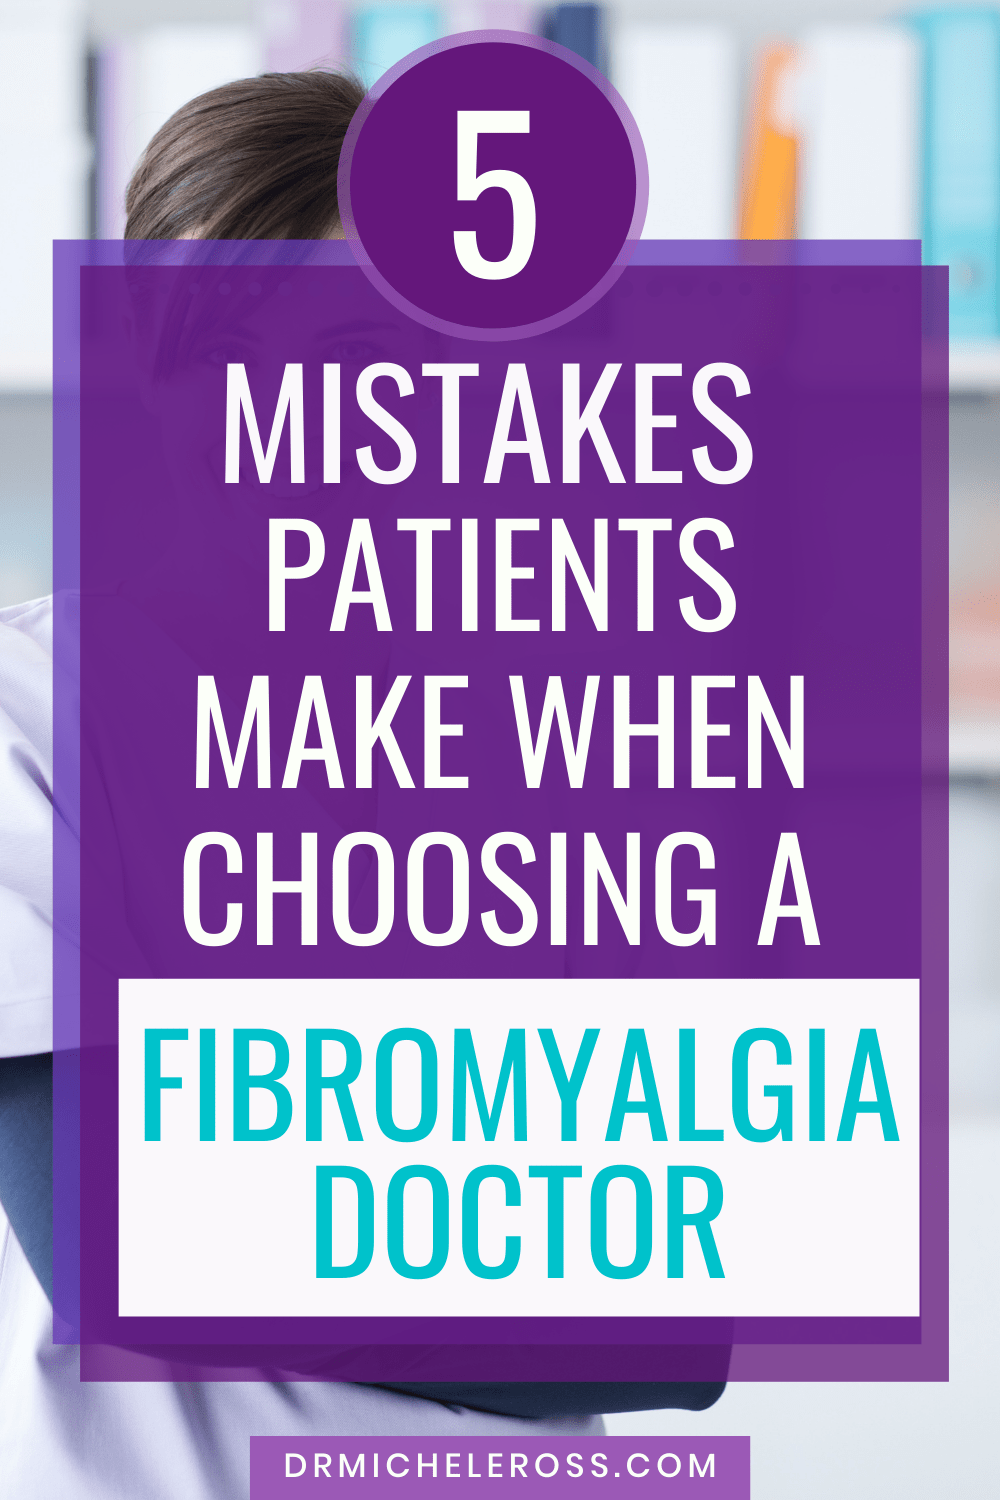 choose a female doctor that supports your cannabis use for fibromyalgia